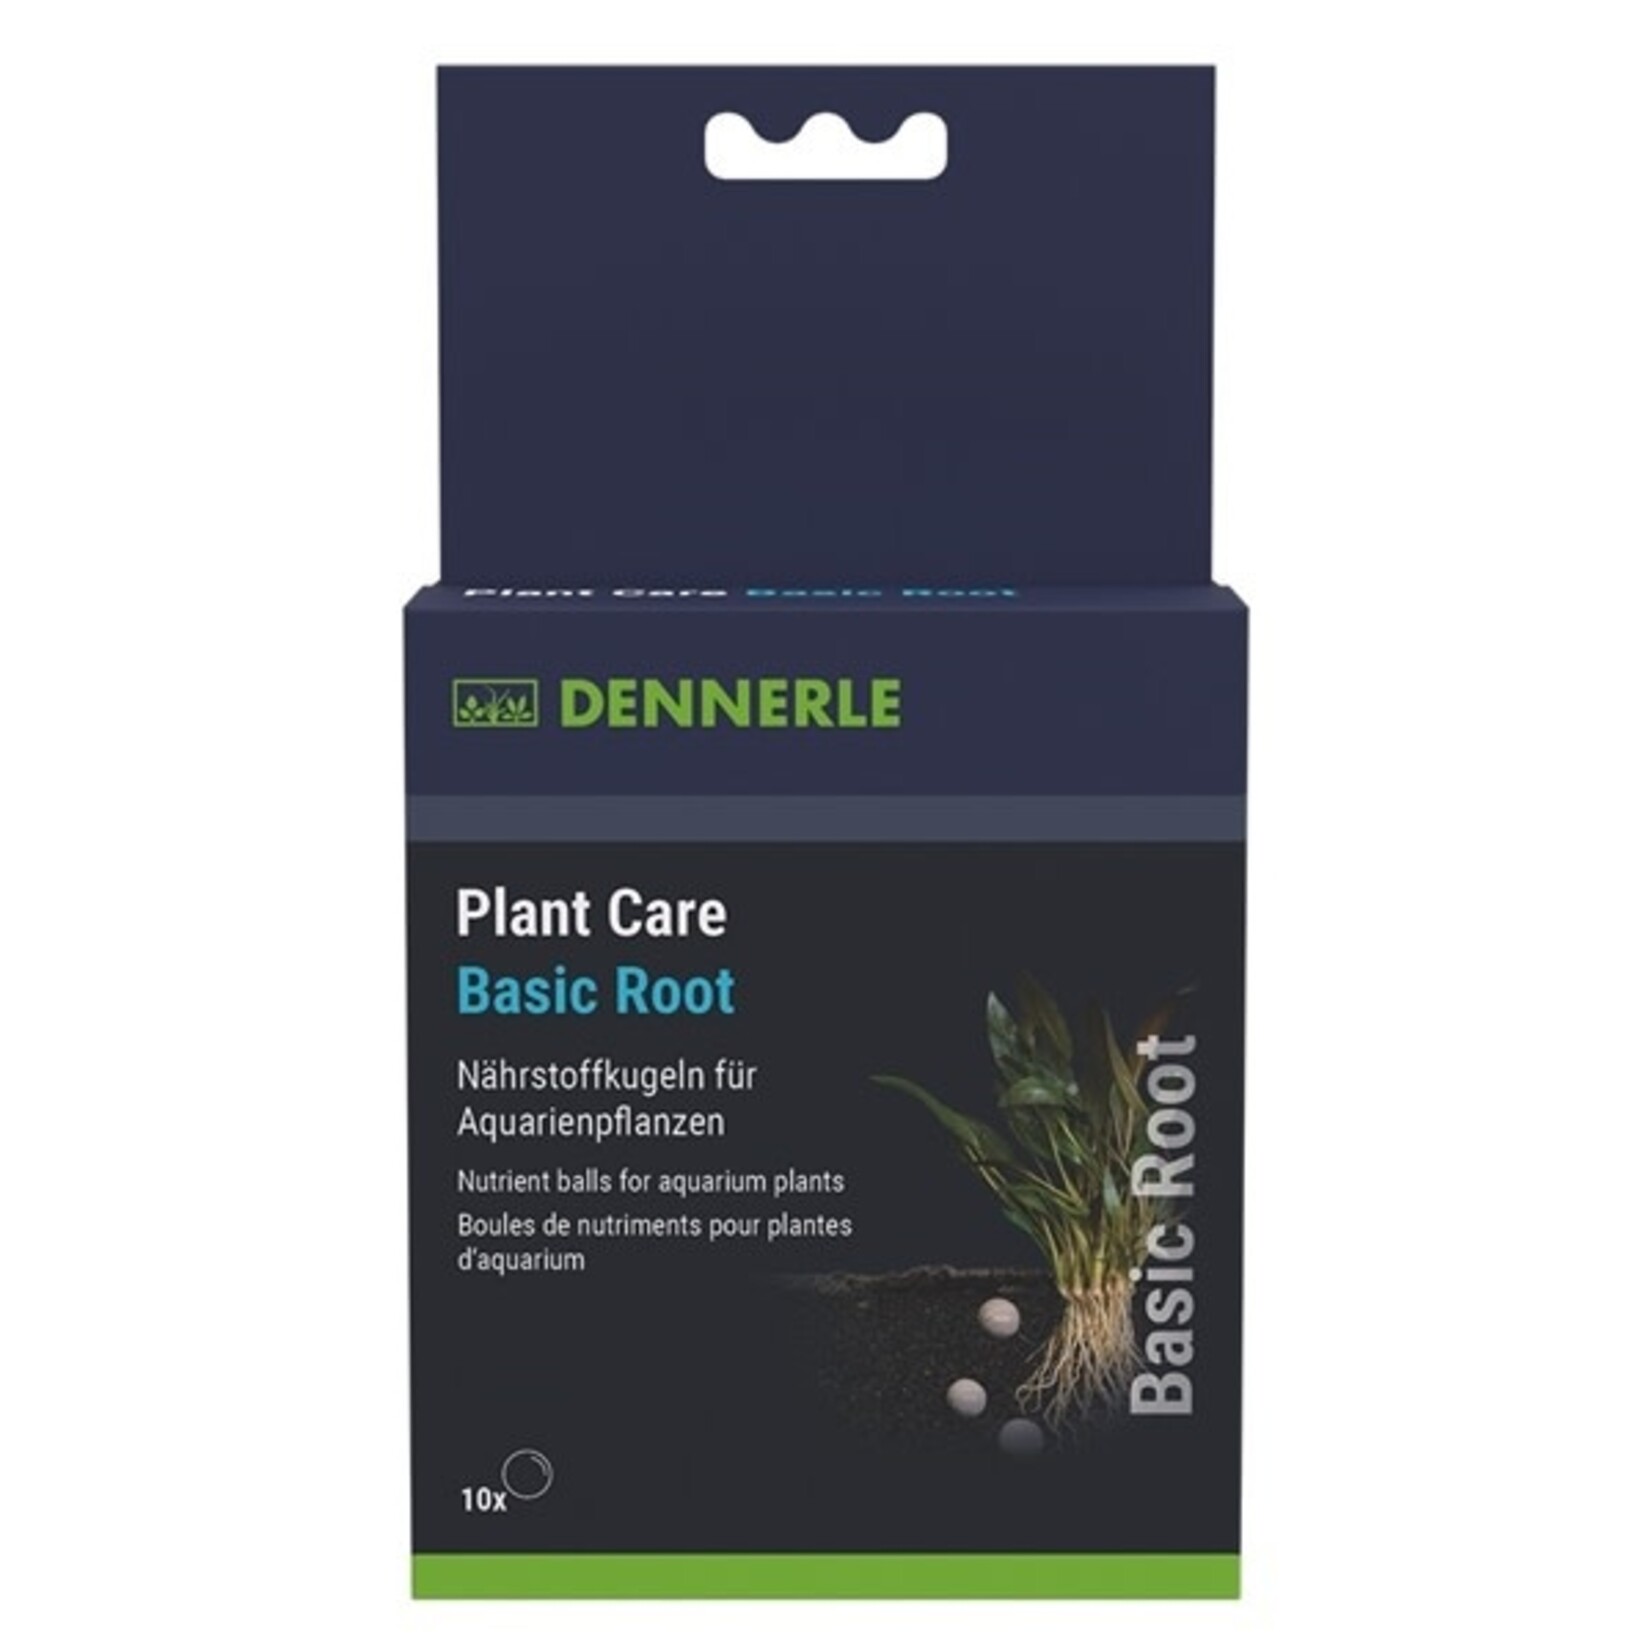 Dennerle DENNERLE PLANT CARE BASIC ROOT 10 ST.